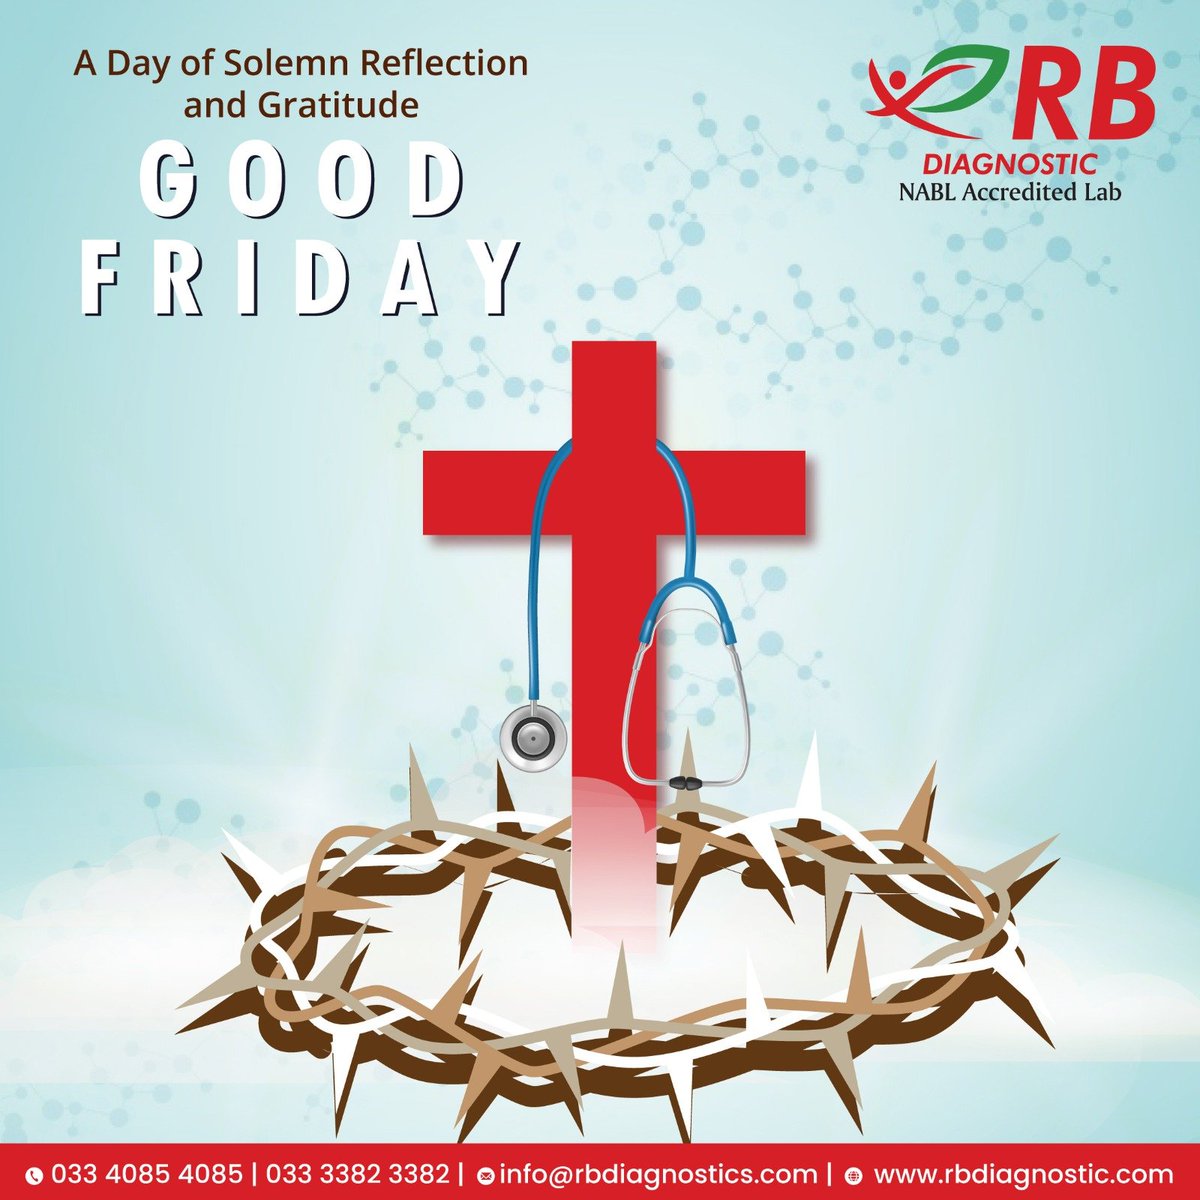 On this Good Friday, may we remember the ultimate sacrifice and find solace in His love.
.
.
.
#RBDiagnostic #GoodFridayReflections #SacrificeAndLove #DivineMercy #SpiritualRenewal #Diagnostic #MedicalLab #HealthCare #Healthylifestyle #LabTest #LabReports #DiagnosticCentre